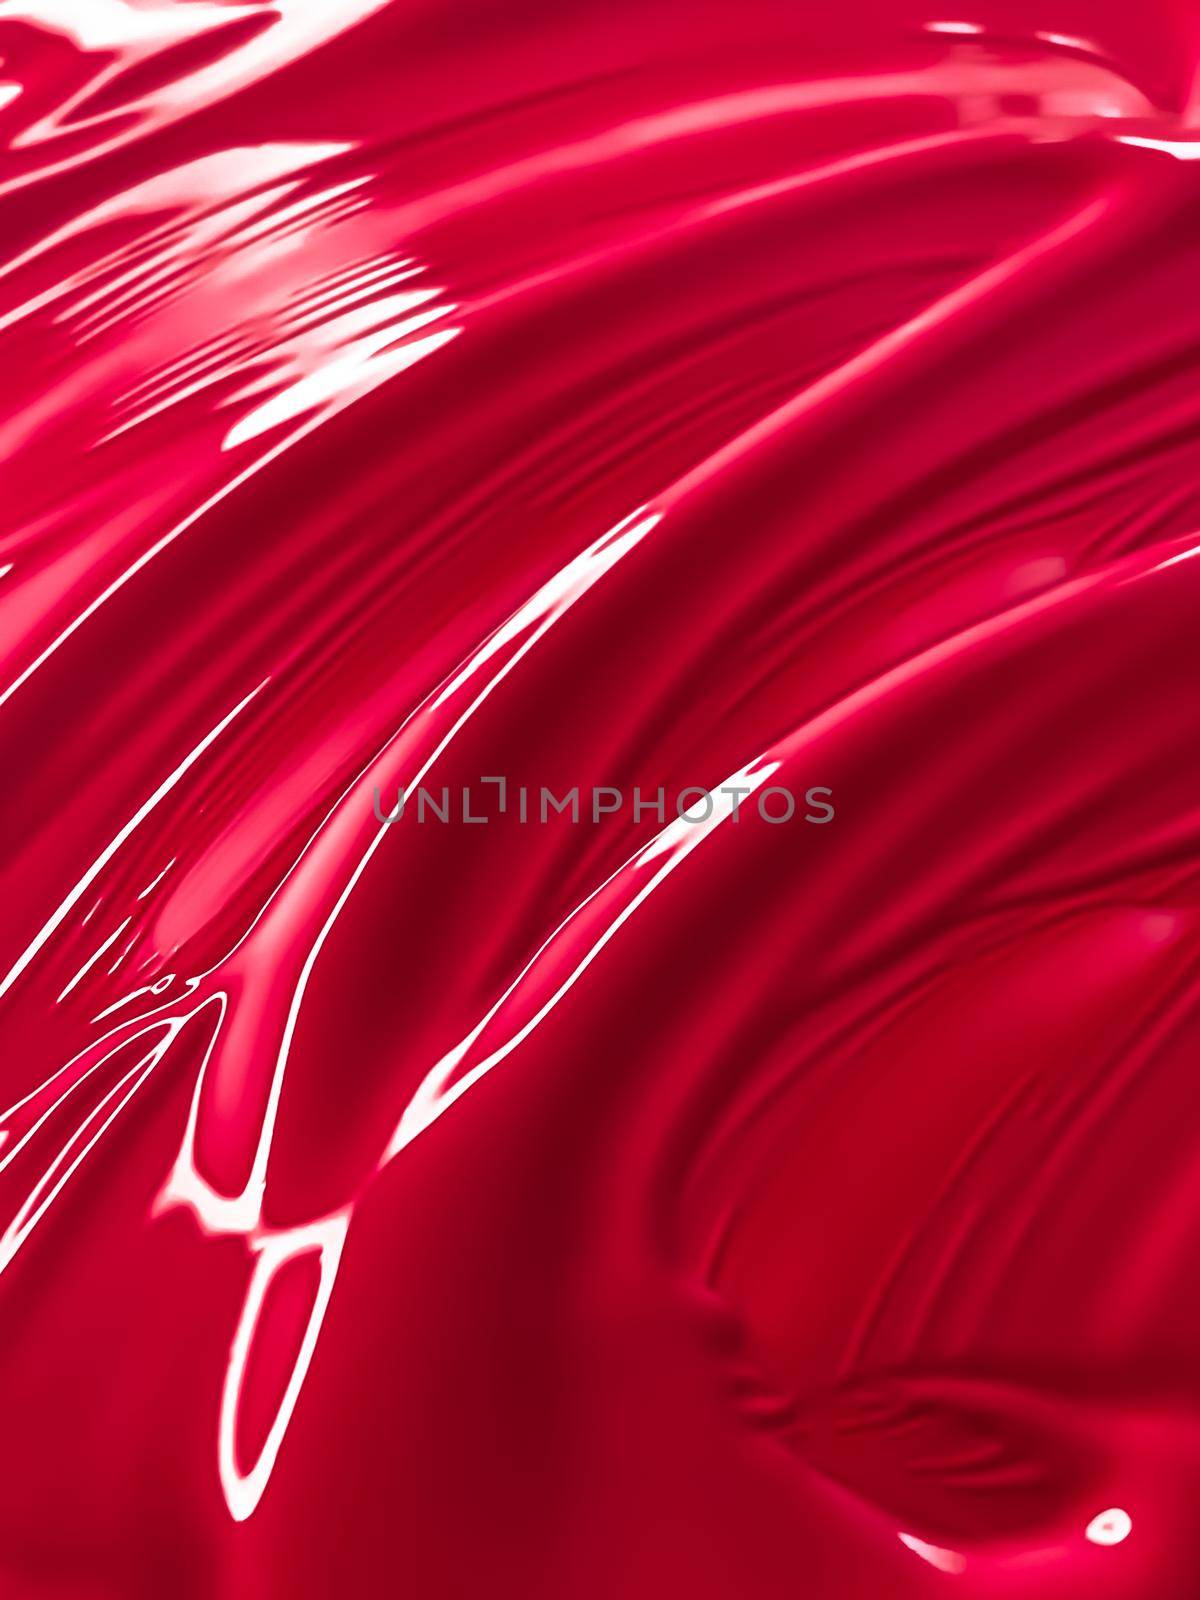 Glossy red cosmetic texture as beauty make-up product background, skincare cosmetics and luxury makeup brand design by Anneleven